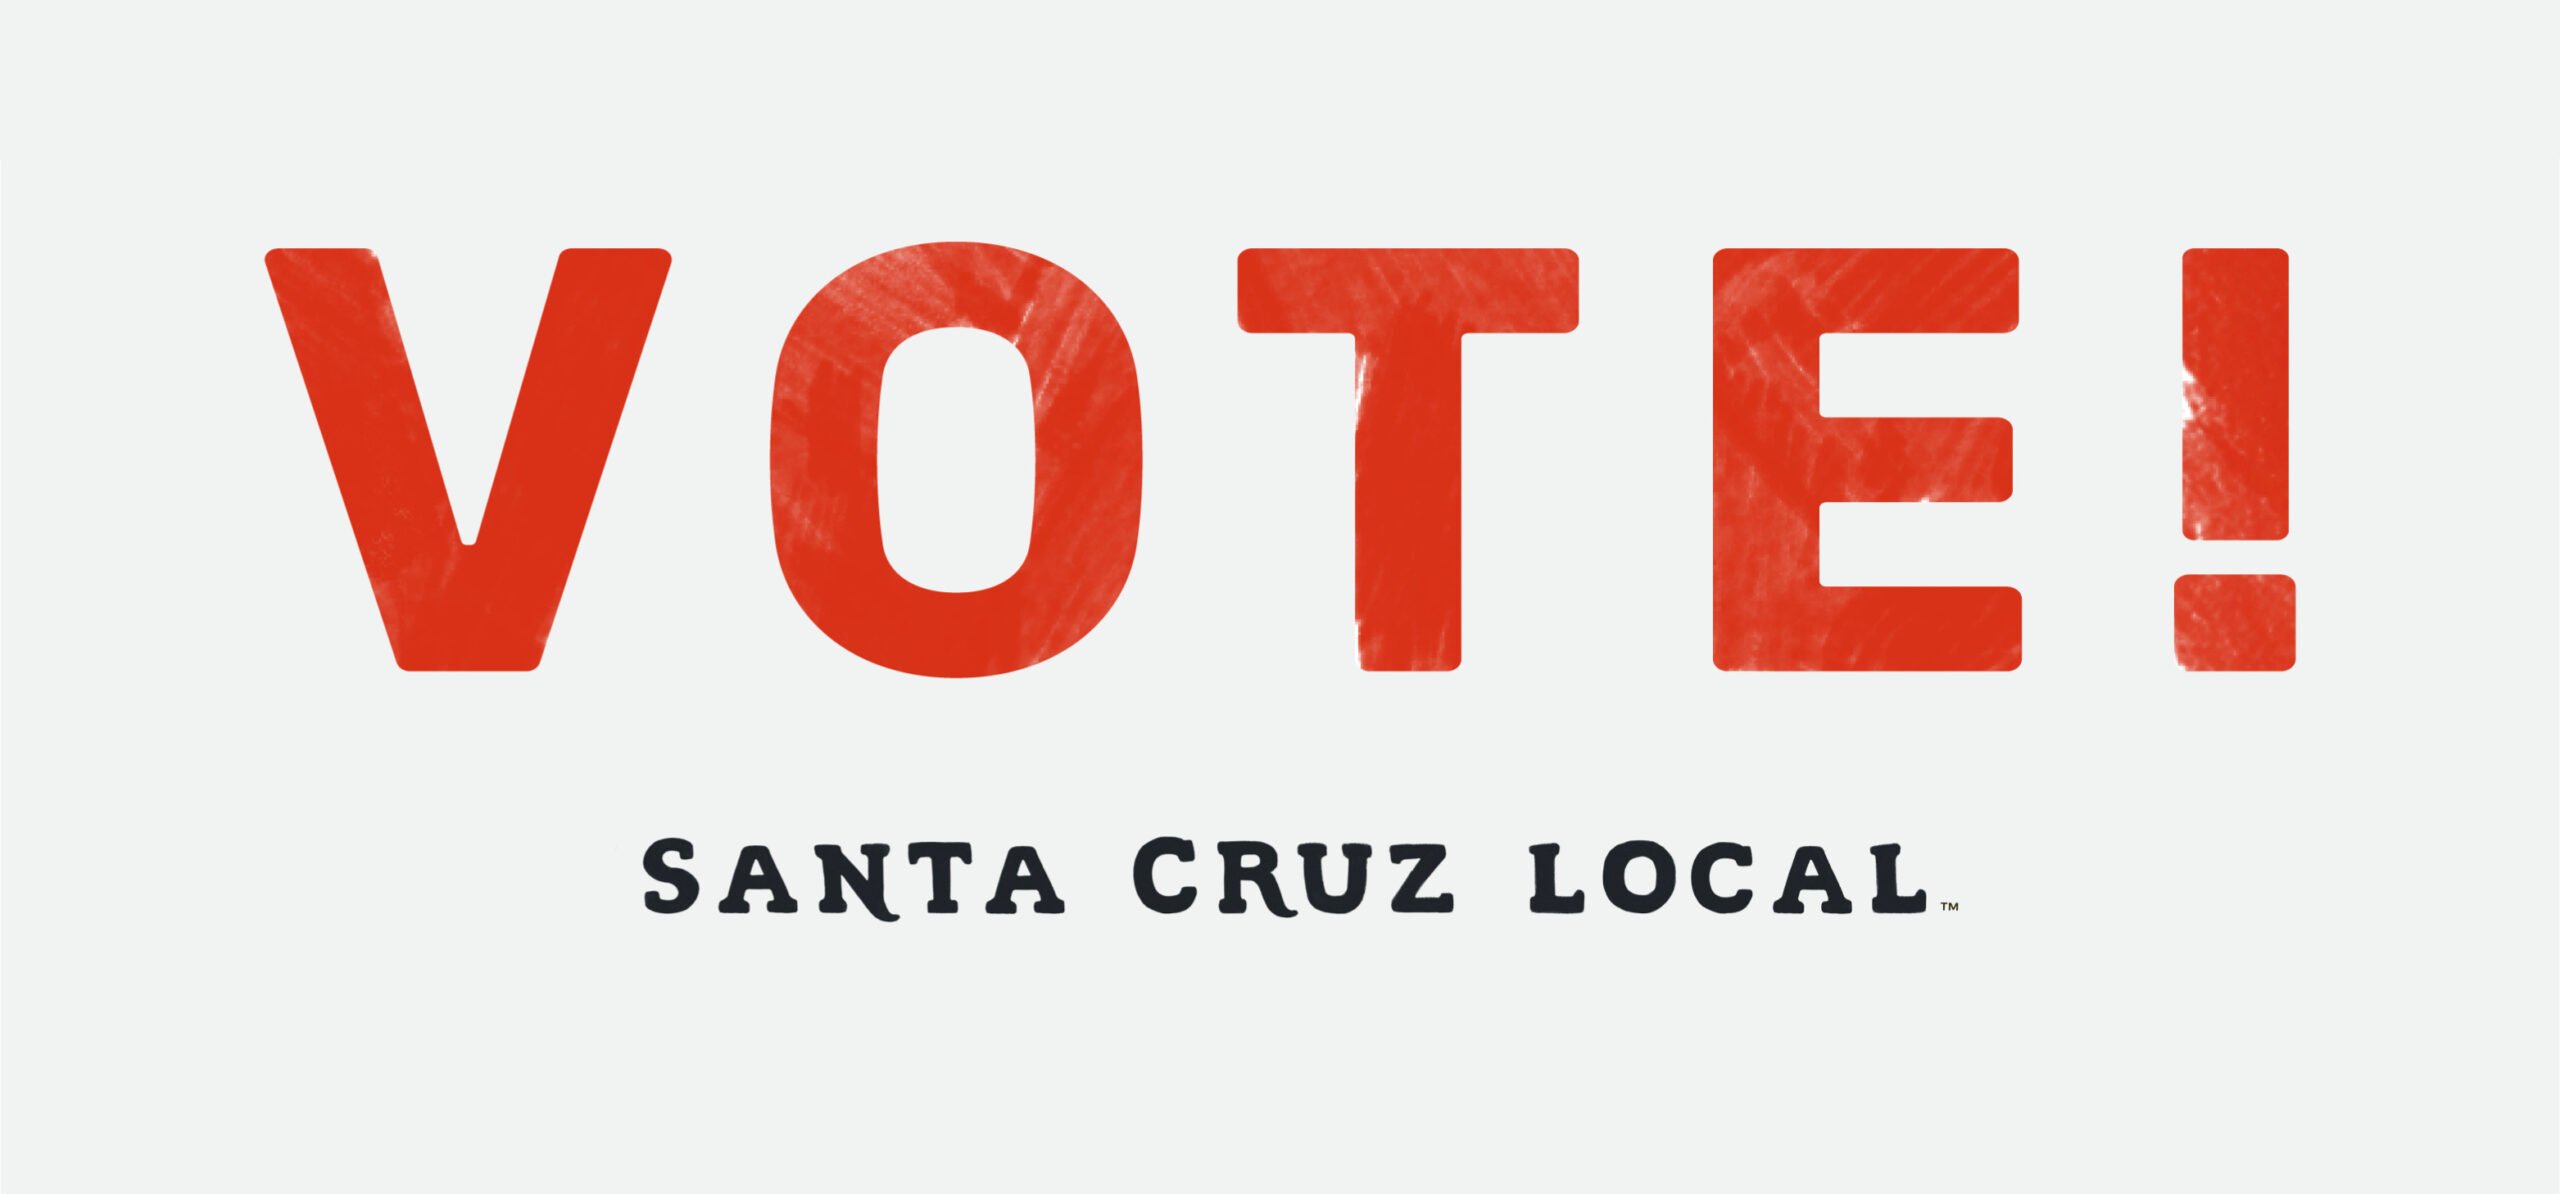 Vote in red all capital letters with "Santa Cruz Local" in black text below. March 5 elections